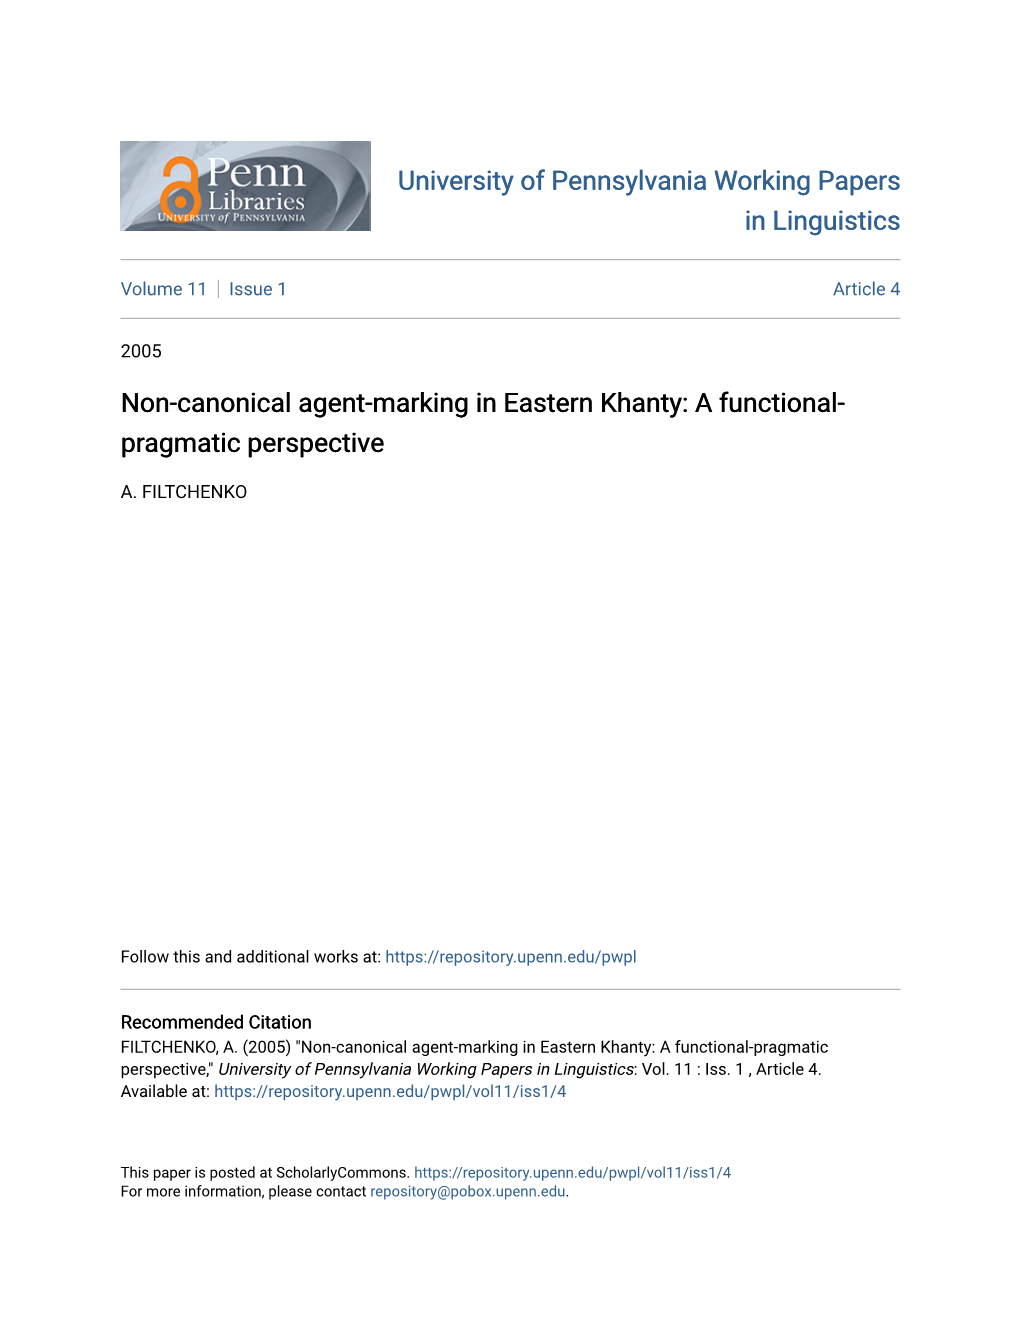 Non-Canonical Agent-Marking in Eastern Khanty: a Functional- Pragmatic Perspective